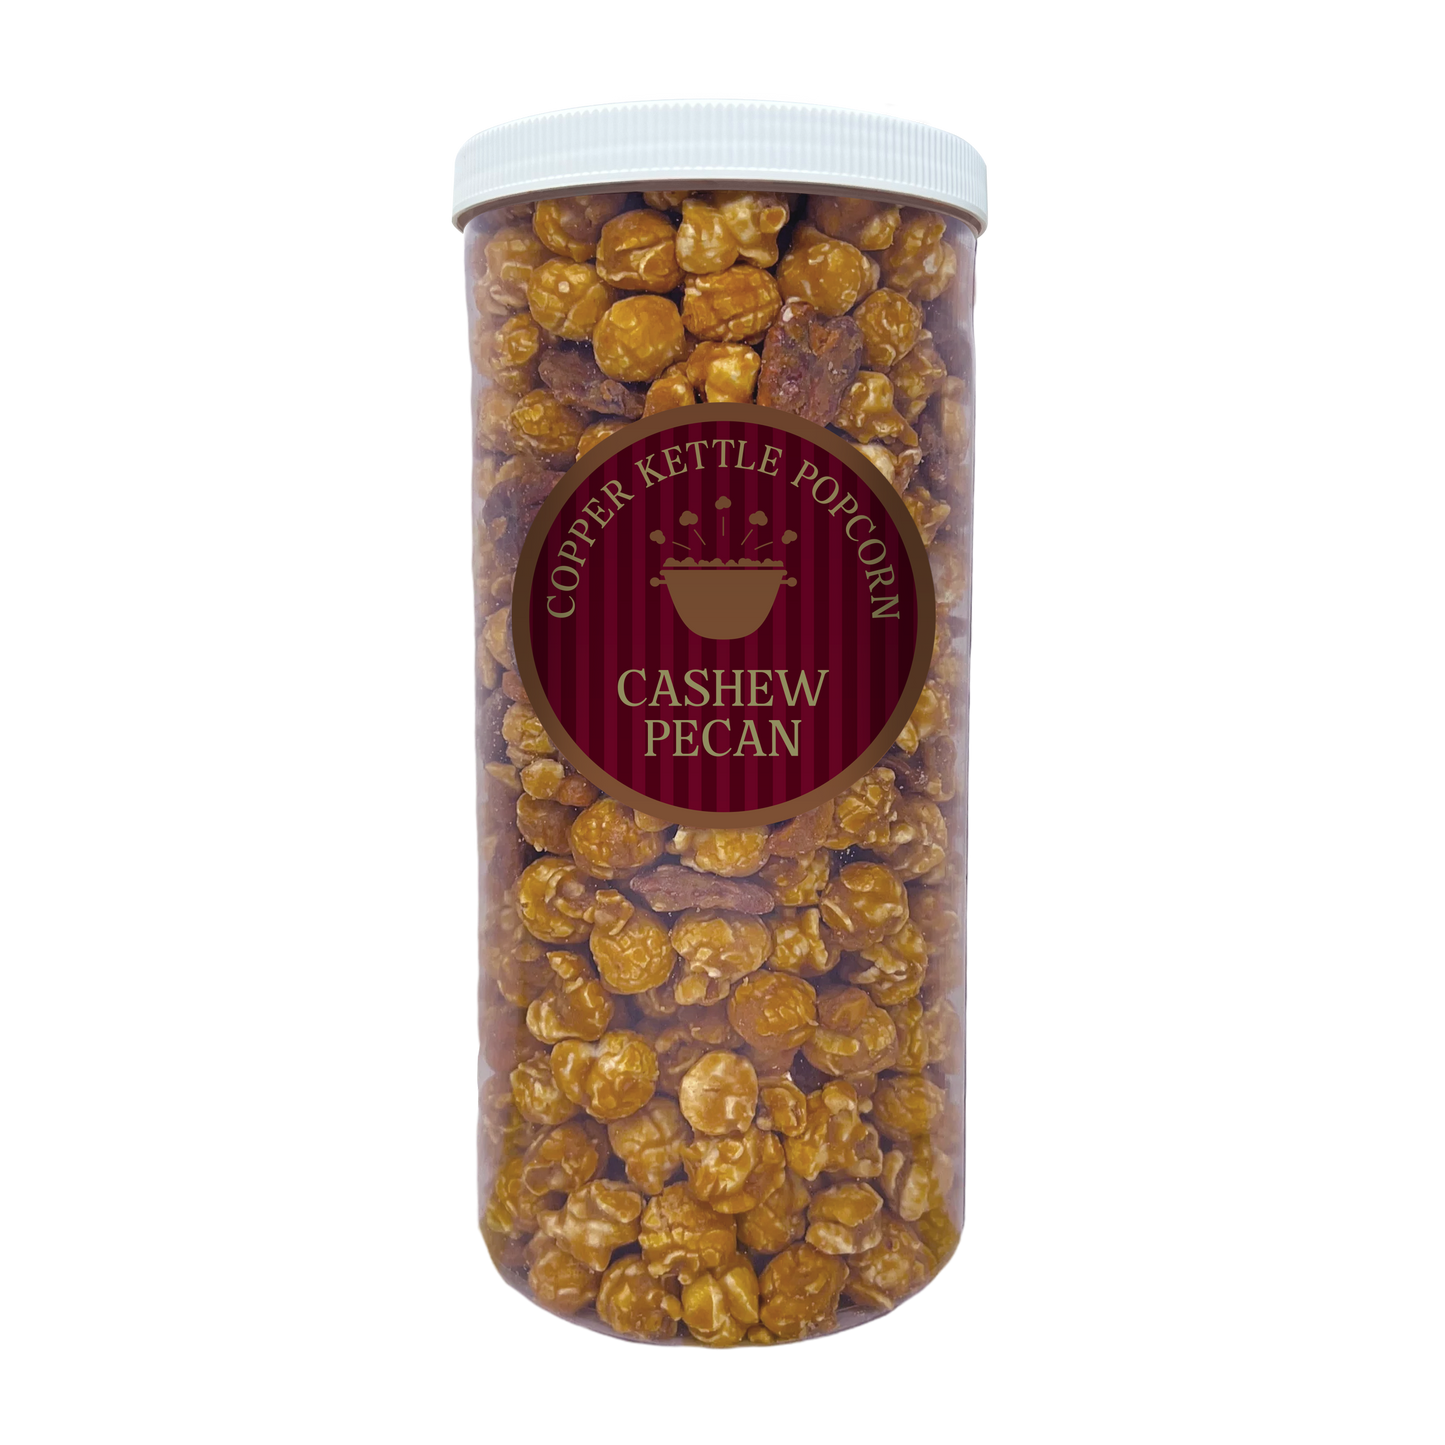 Cashew Pecan Canister - 12 Serving